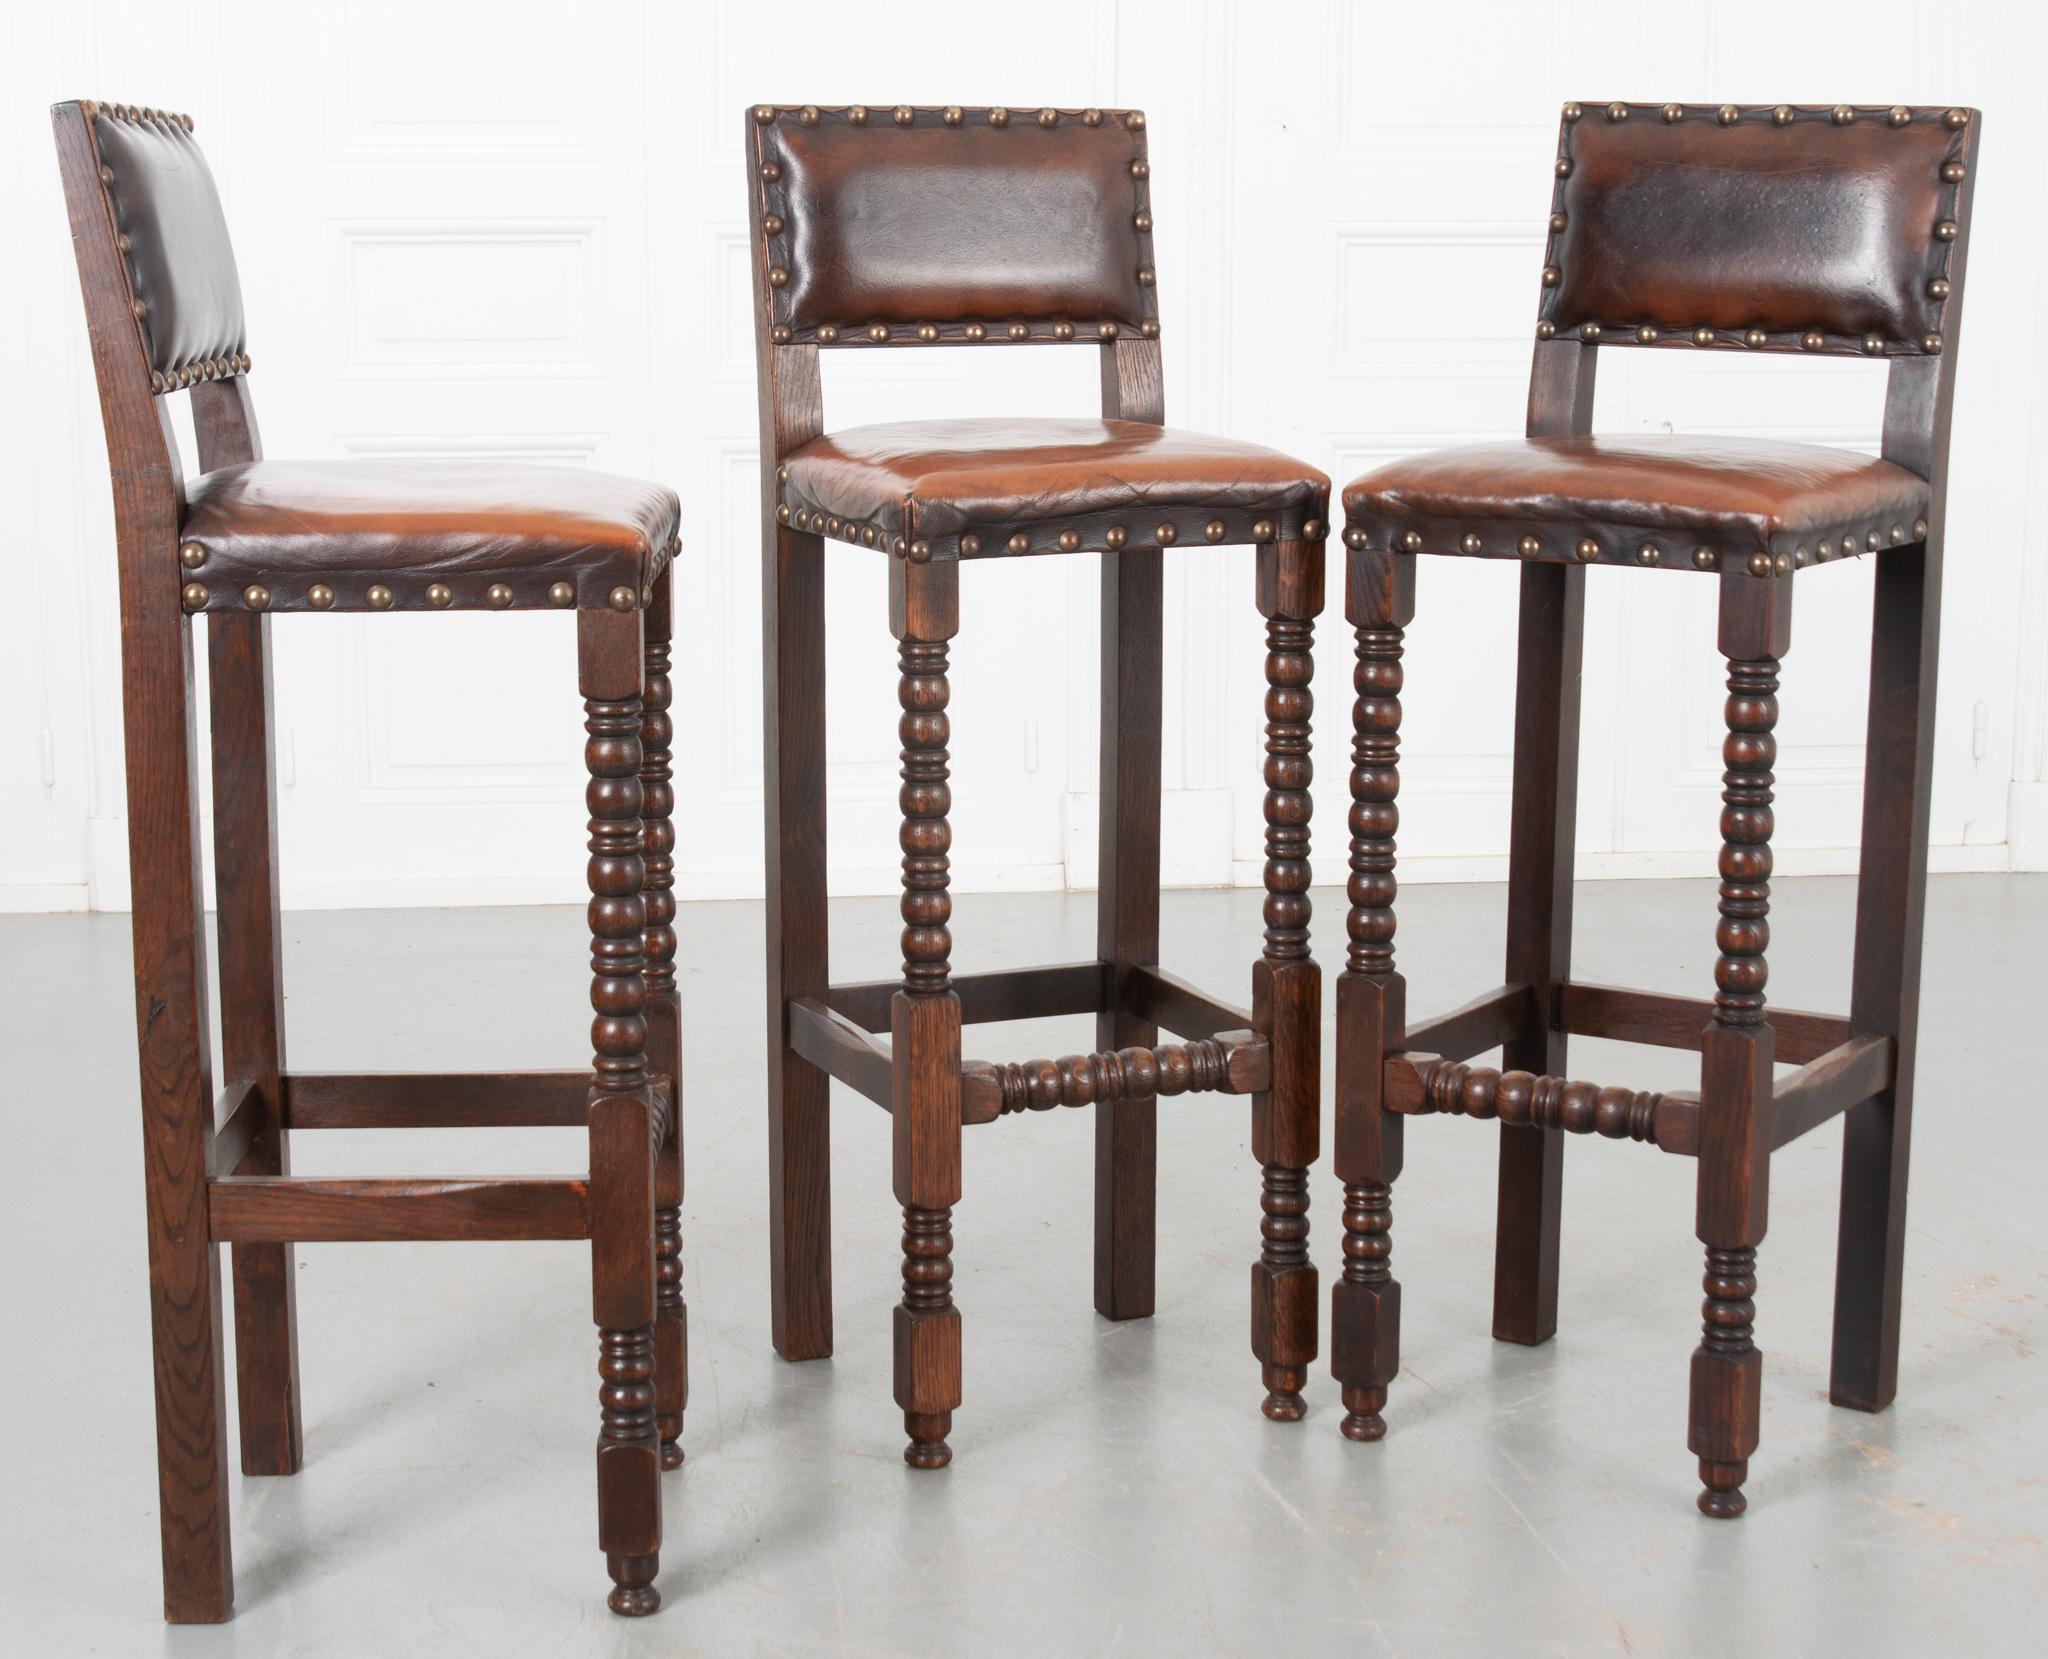 Sold as a set of three, these 19th century oak and leather chairs are in amazing condition. The leather is supple and durable, varying in shade depending on where it has been most used. The chair back and seat are both padded and comfortable. The